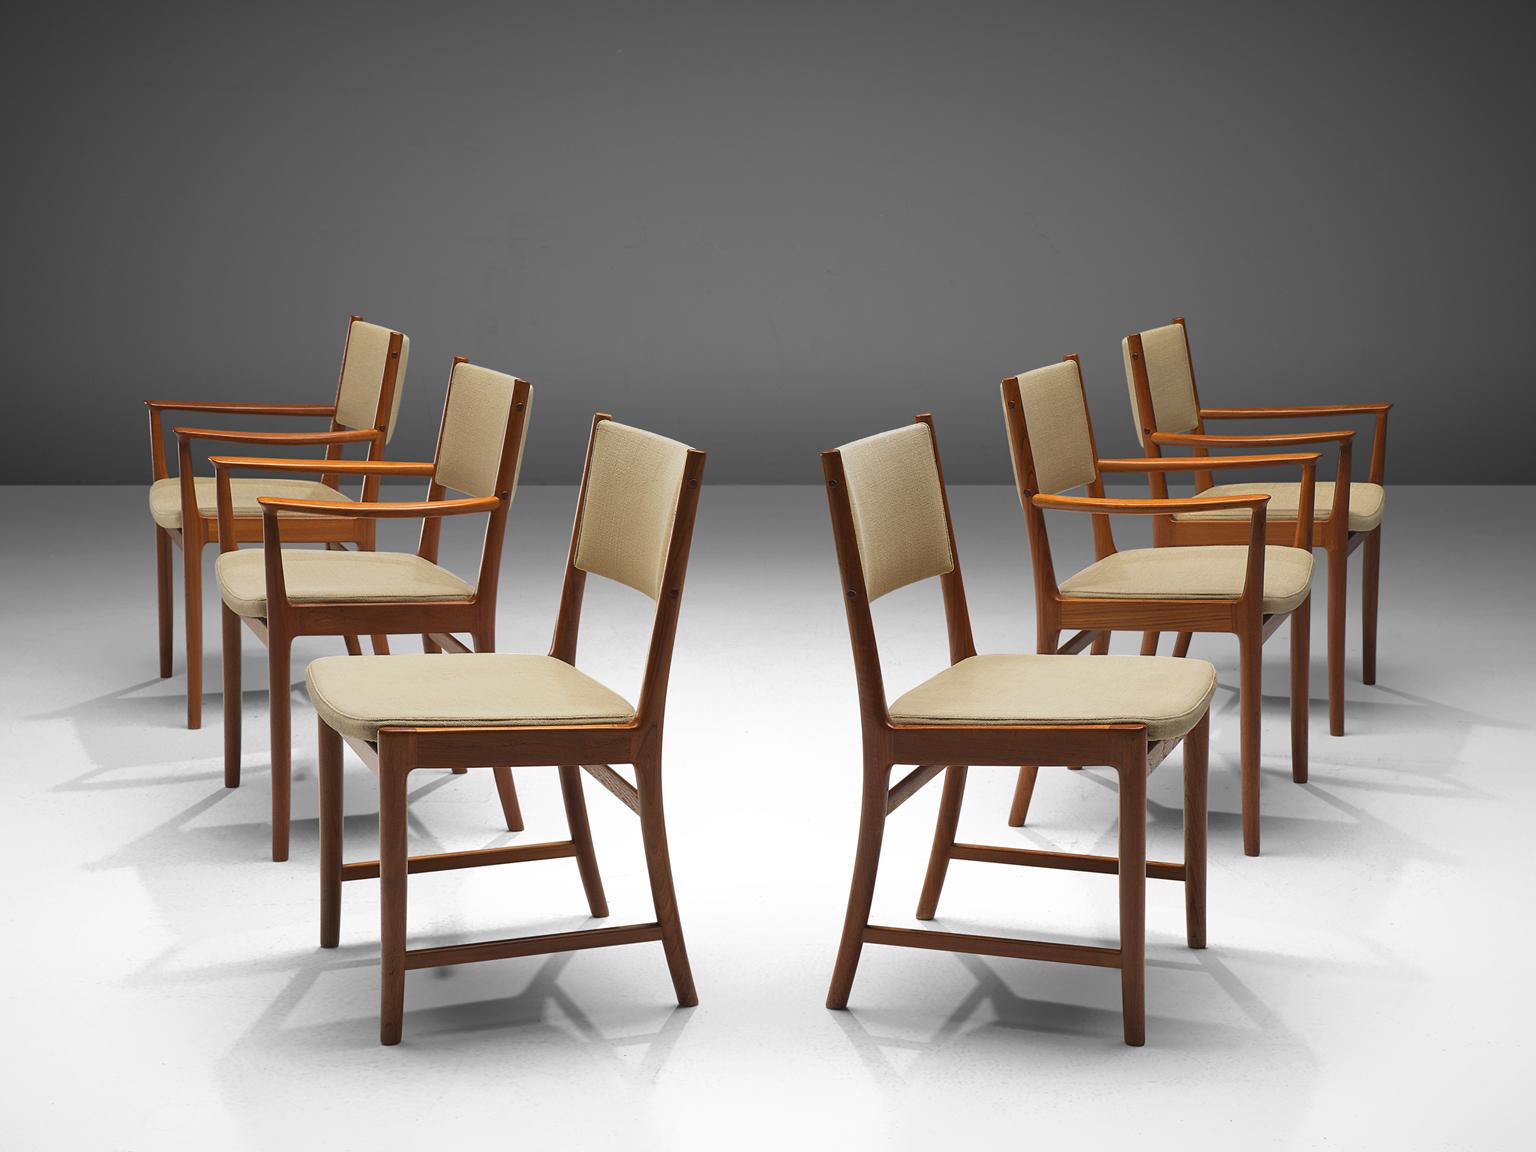 Kai Lingfeld Larsen, set of six dining chairs, teak and beige fabric, Scandinavia, 1950s. 

These elegant teak dining chairs are both stately and modest. Four of these chairs contain armrests. These Scandinavian chairs have a teak frame with a